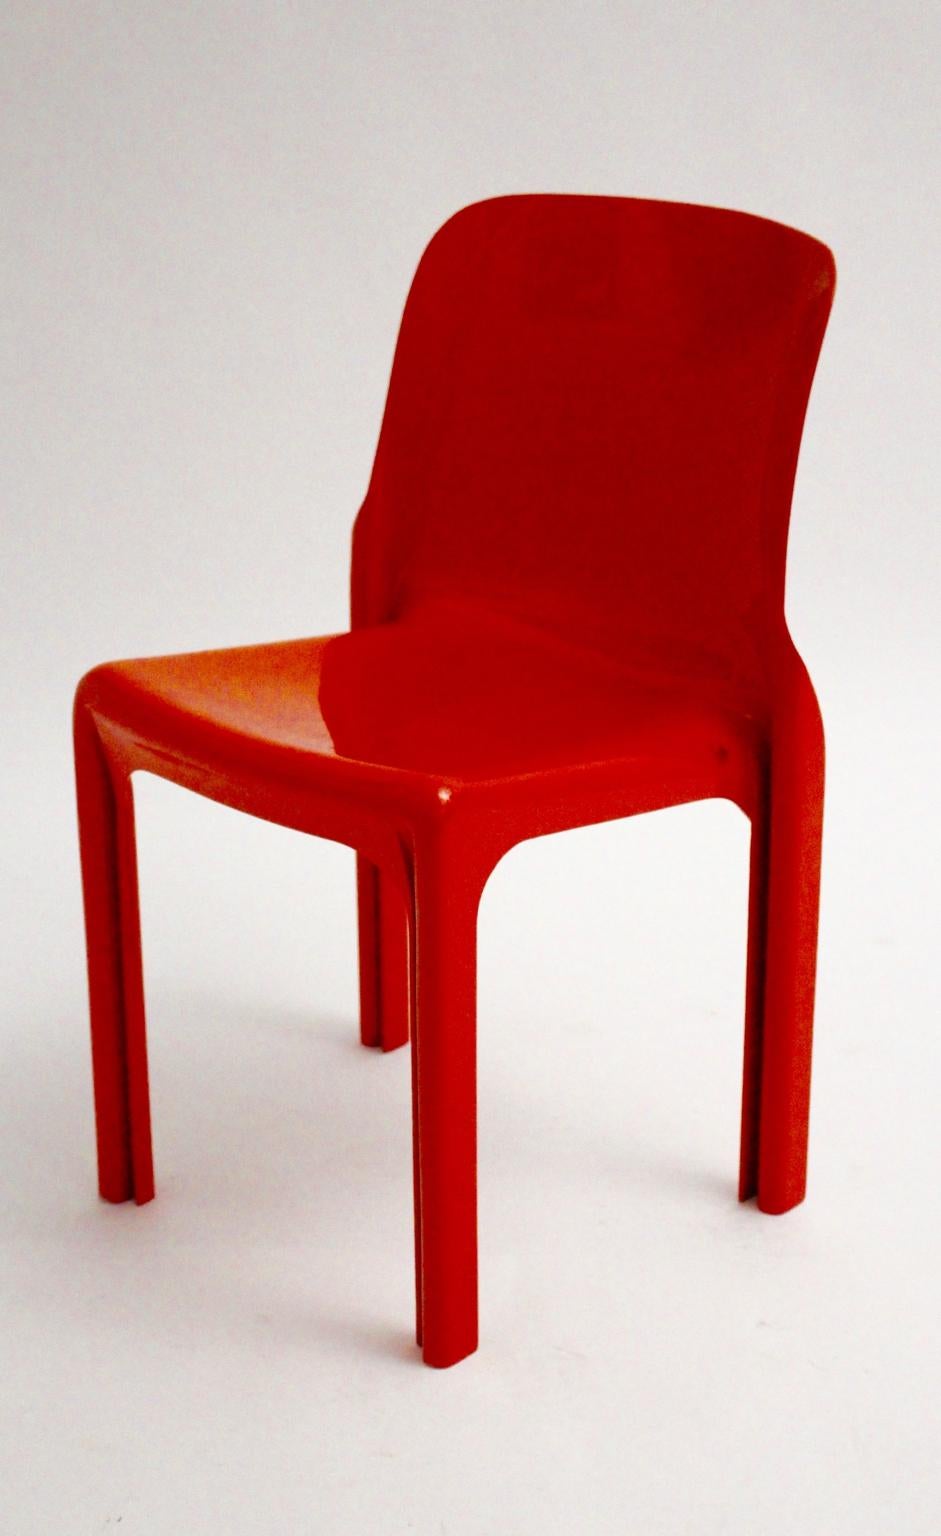 Space Age red vintage plastic chair model Selene designed by Vico Magistretti 1968 for Artemide Milano, Italy.
The chair shows a very good vintage condition with fine scratches on the glossy surface.
Also the chair is a colorful highlight for your